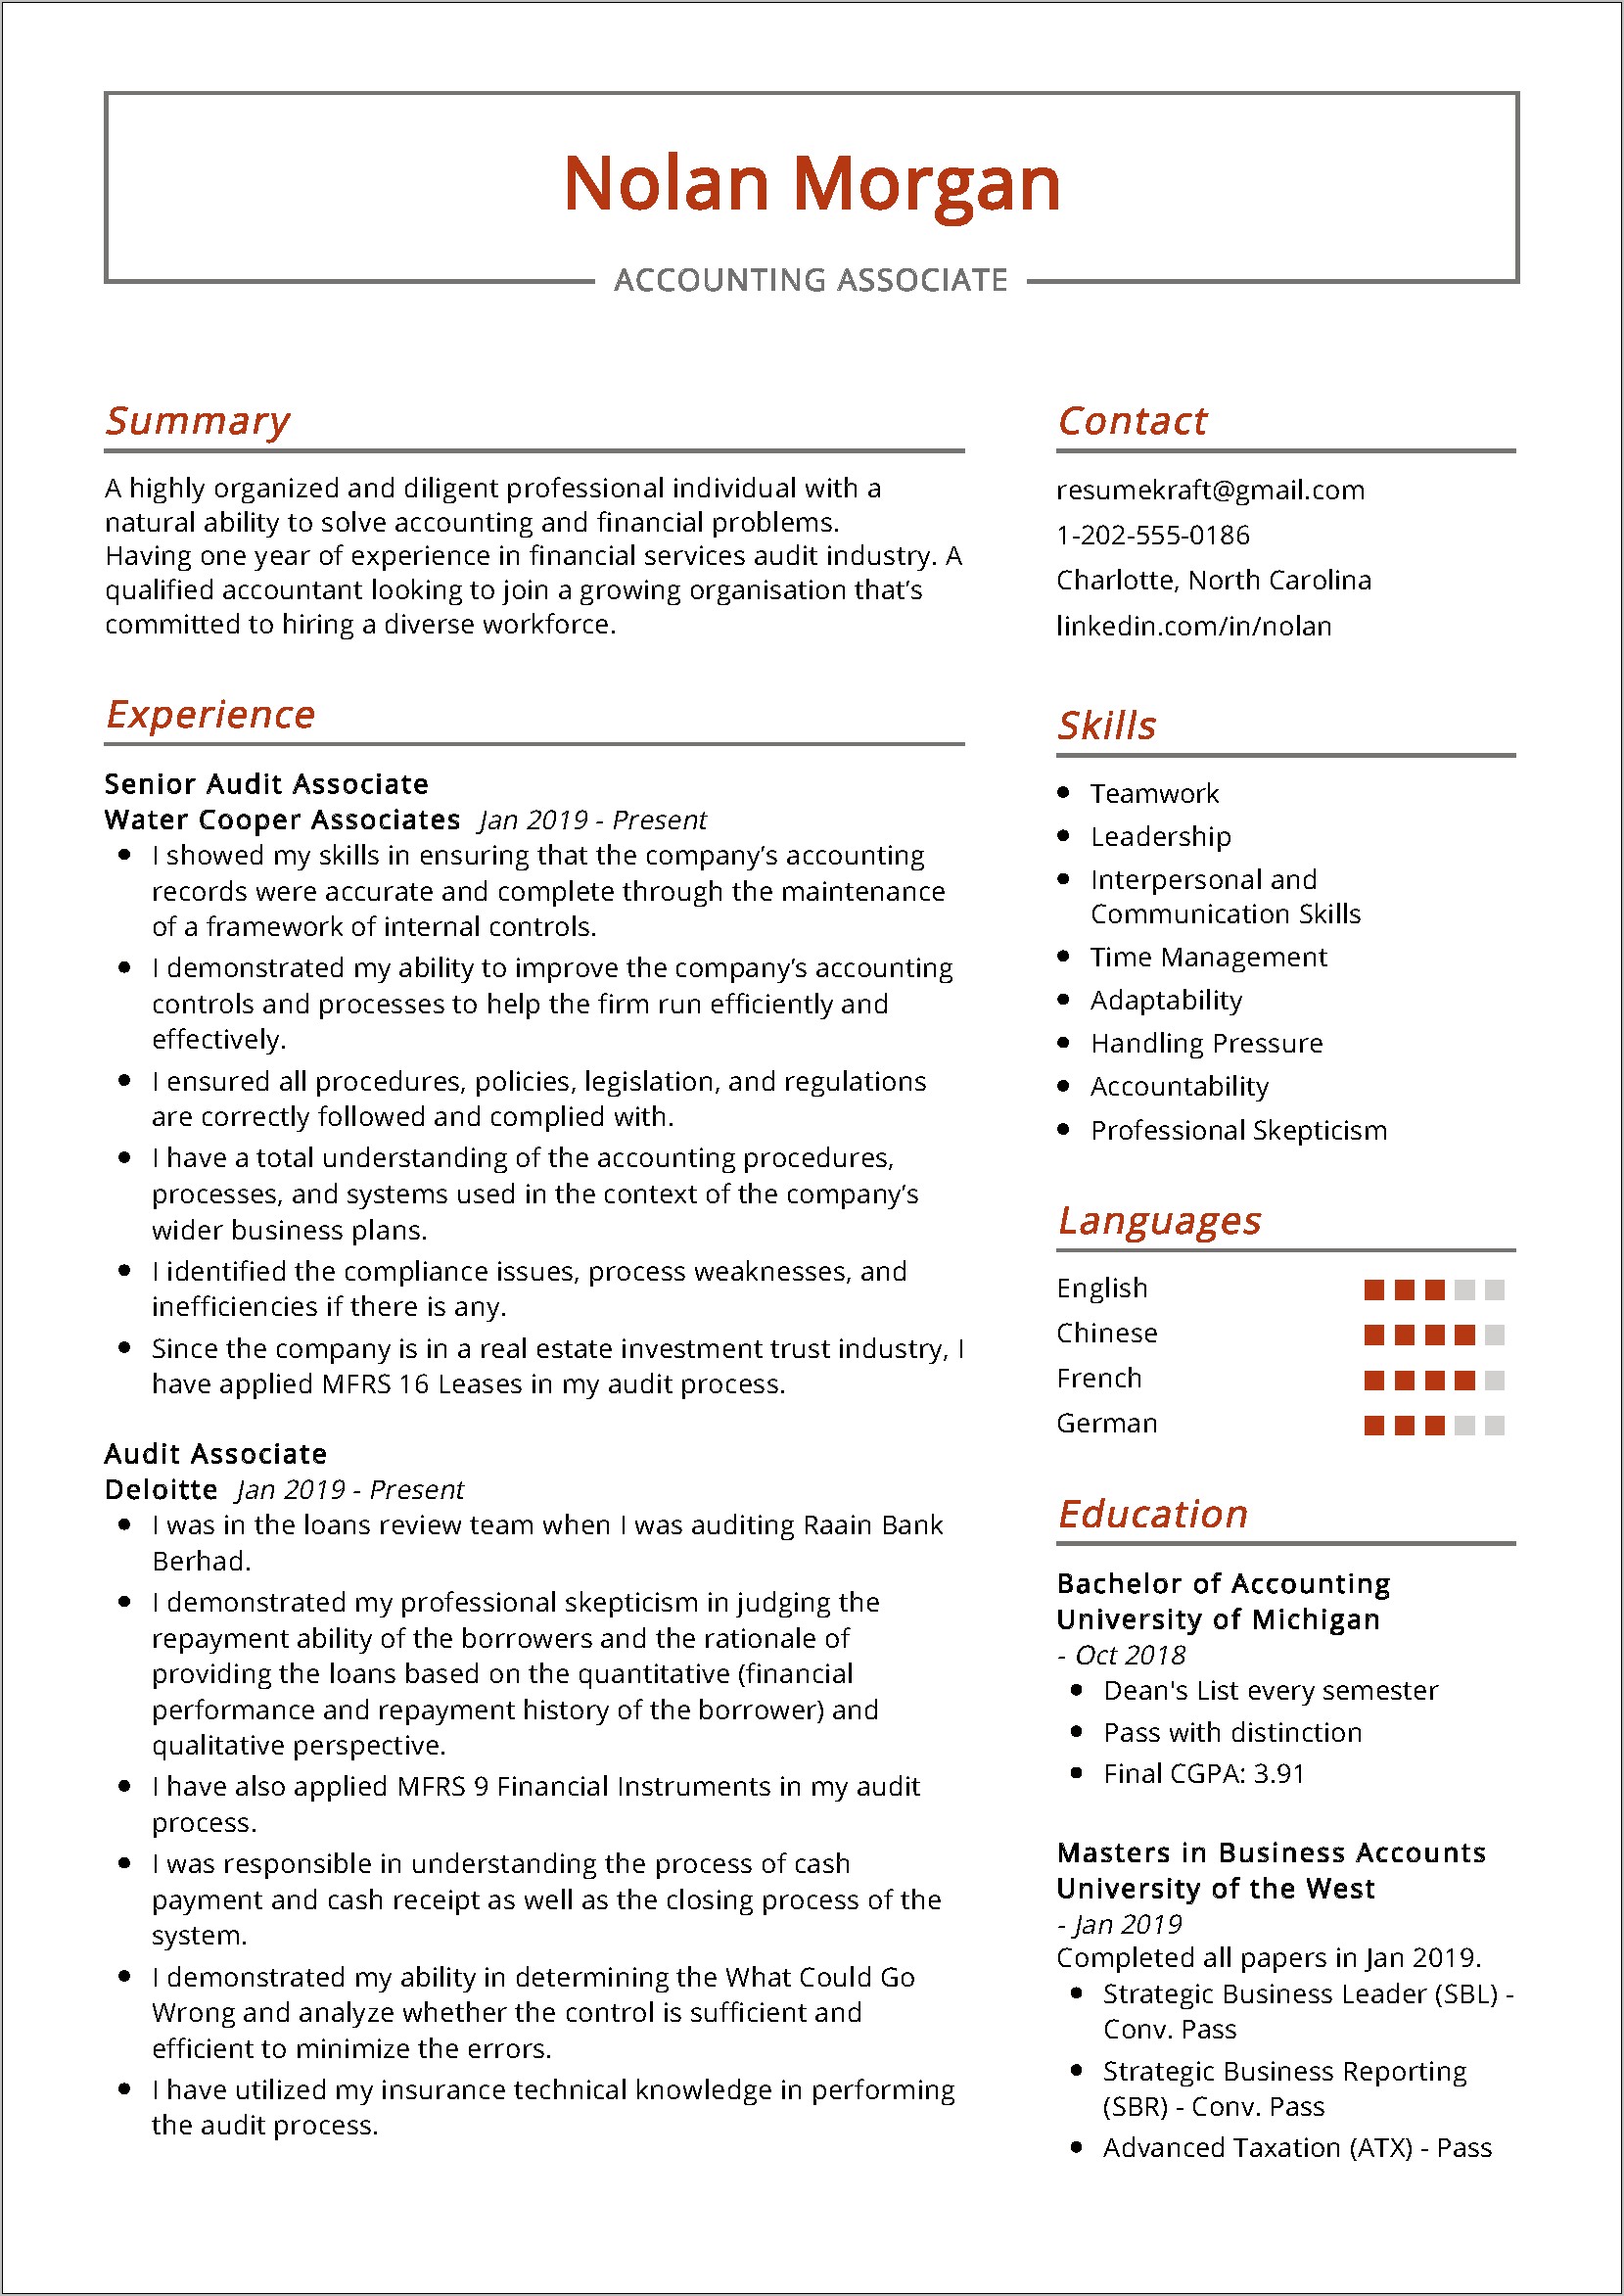 Accounting Skills And Abilities Resume